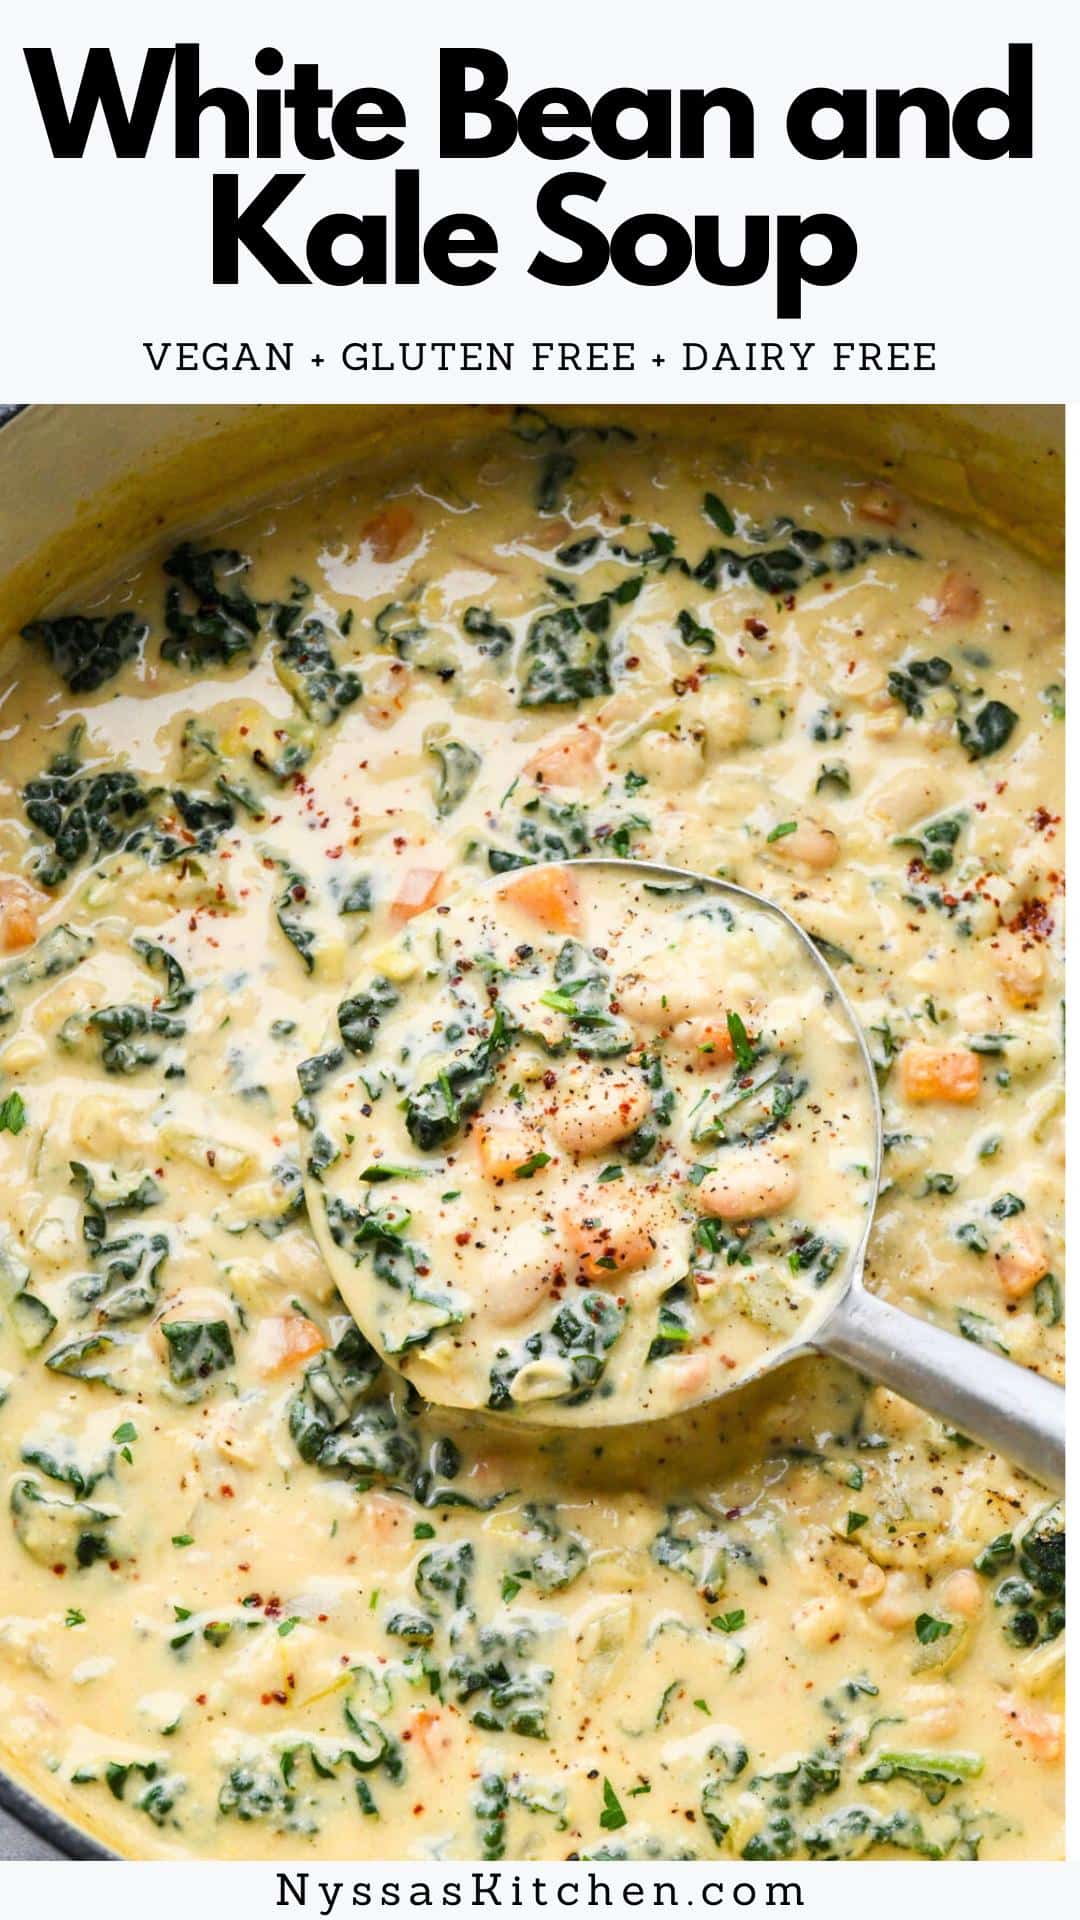 If you're looking for a tasty and nutritious meal that's also dairy-free, look no further than this healthy white bean and kale soup! Packed with veggies and wholesome cannellini beans, this soup is perfect for meal prep or a quick family dinner. And with its rich, creamy texture and comforting flavors, you won't even miss the dairy! Vegan and gluten free.